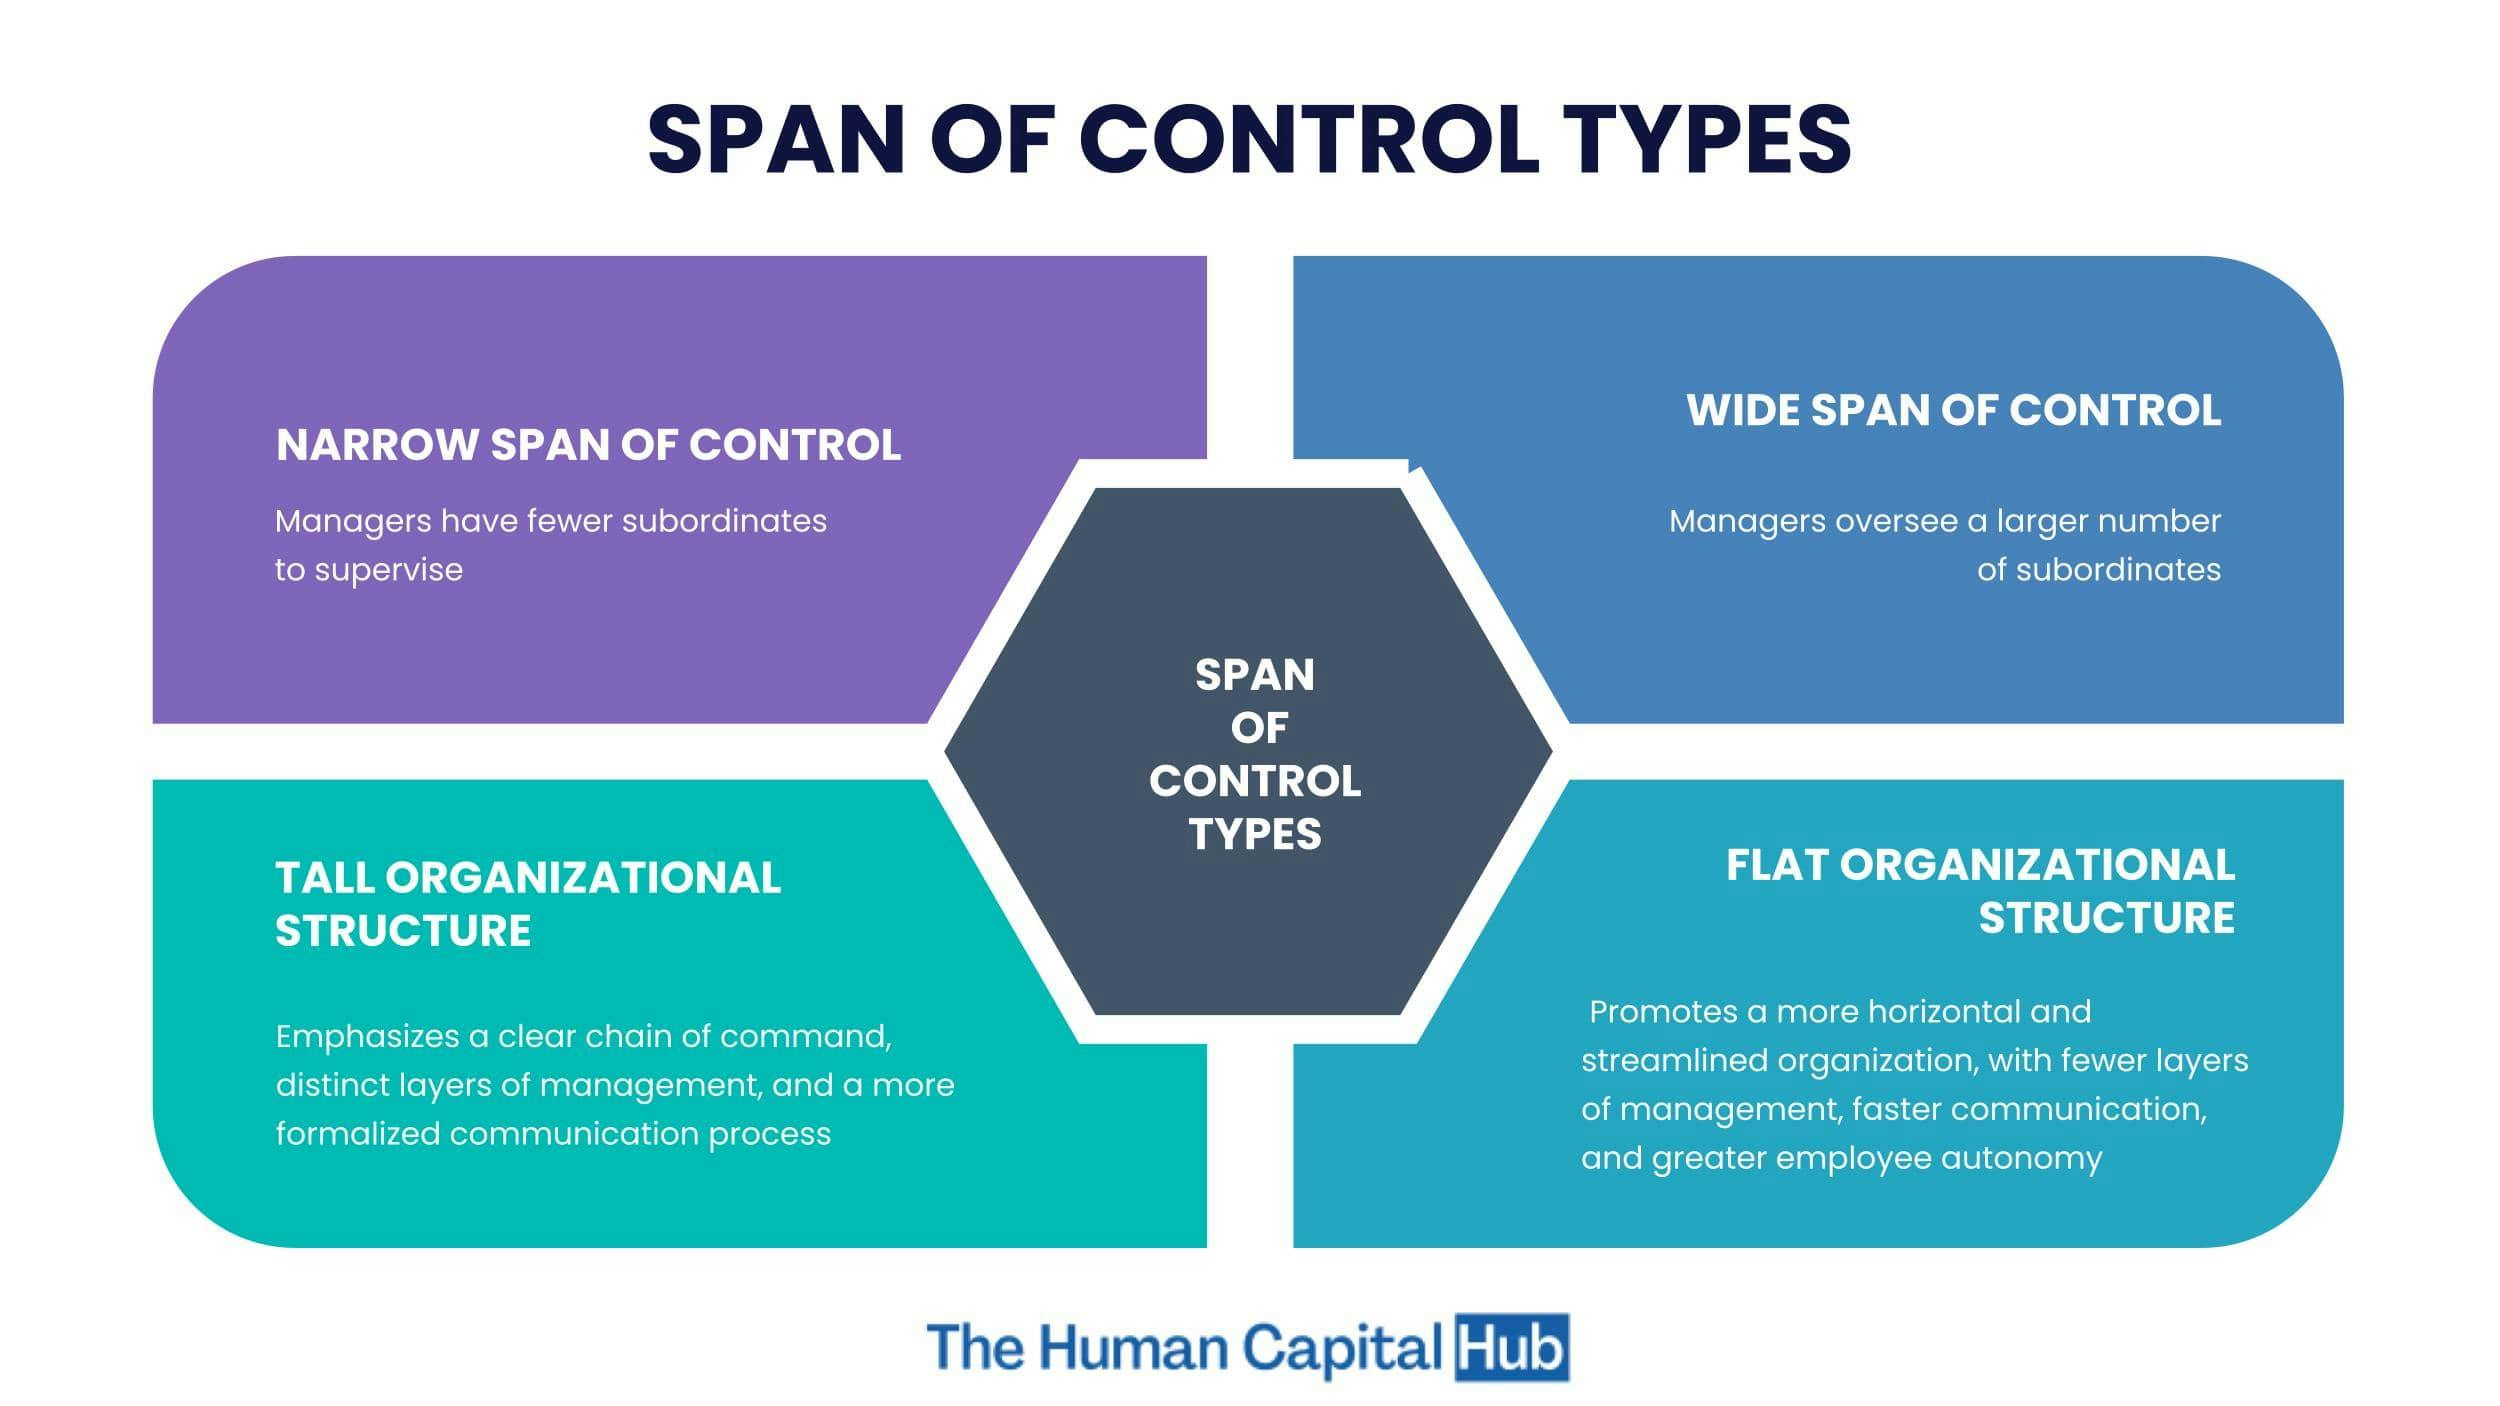 Types of Span of Control